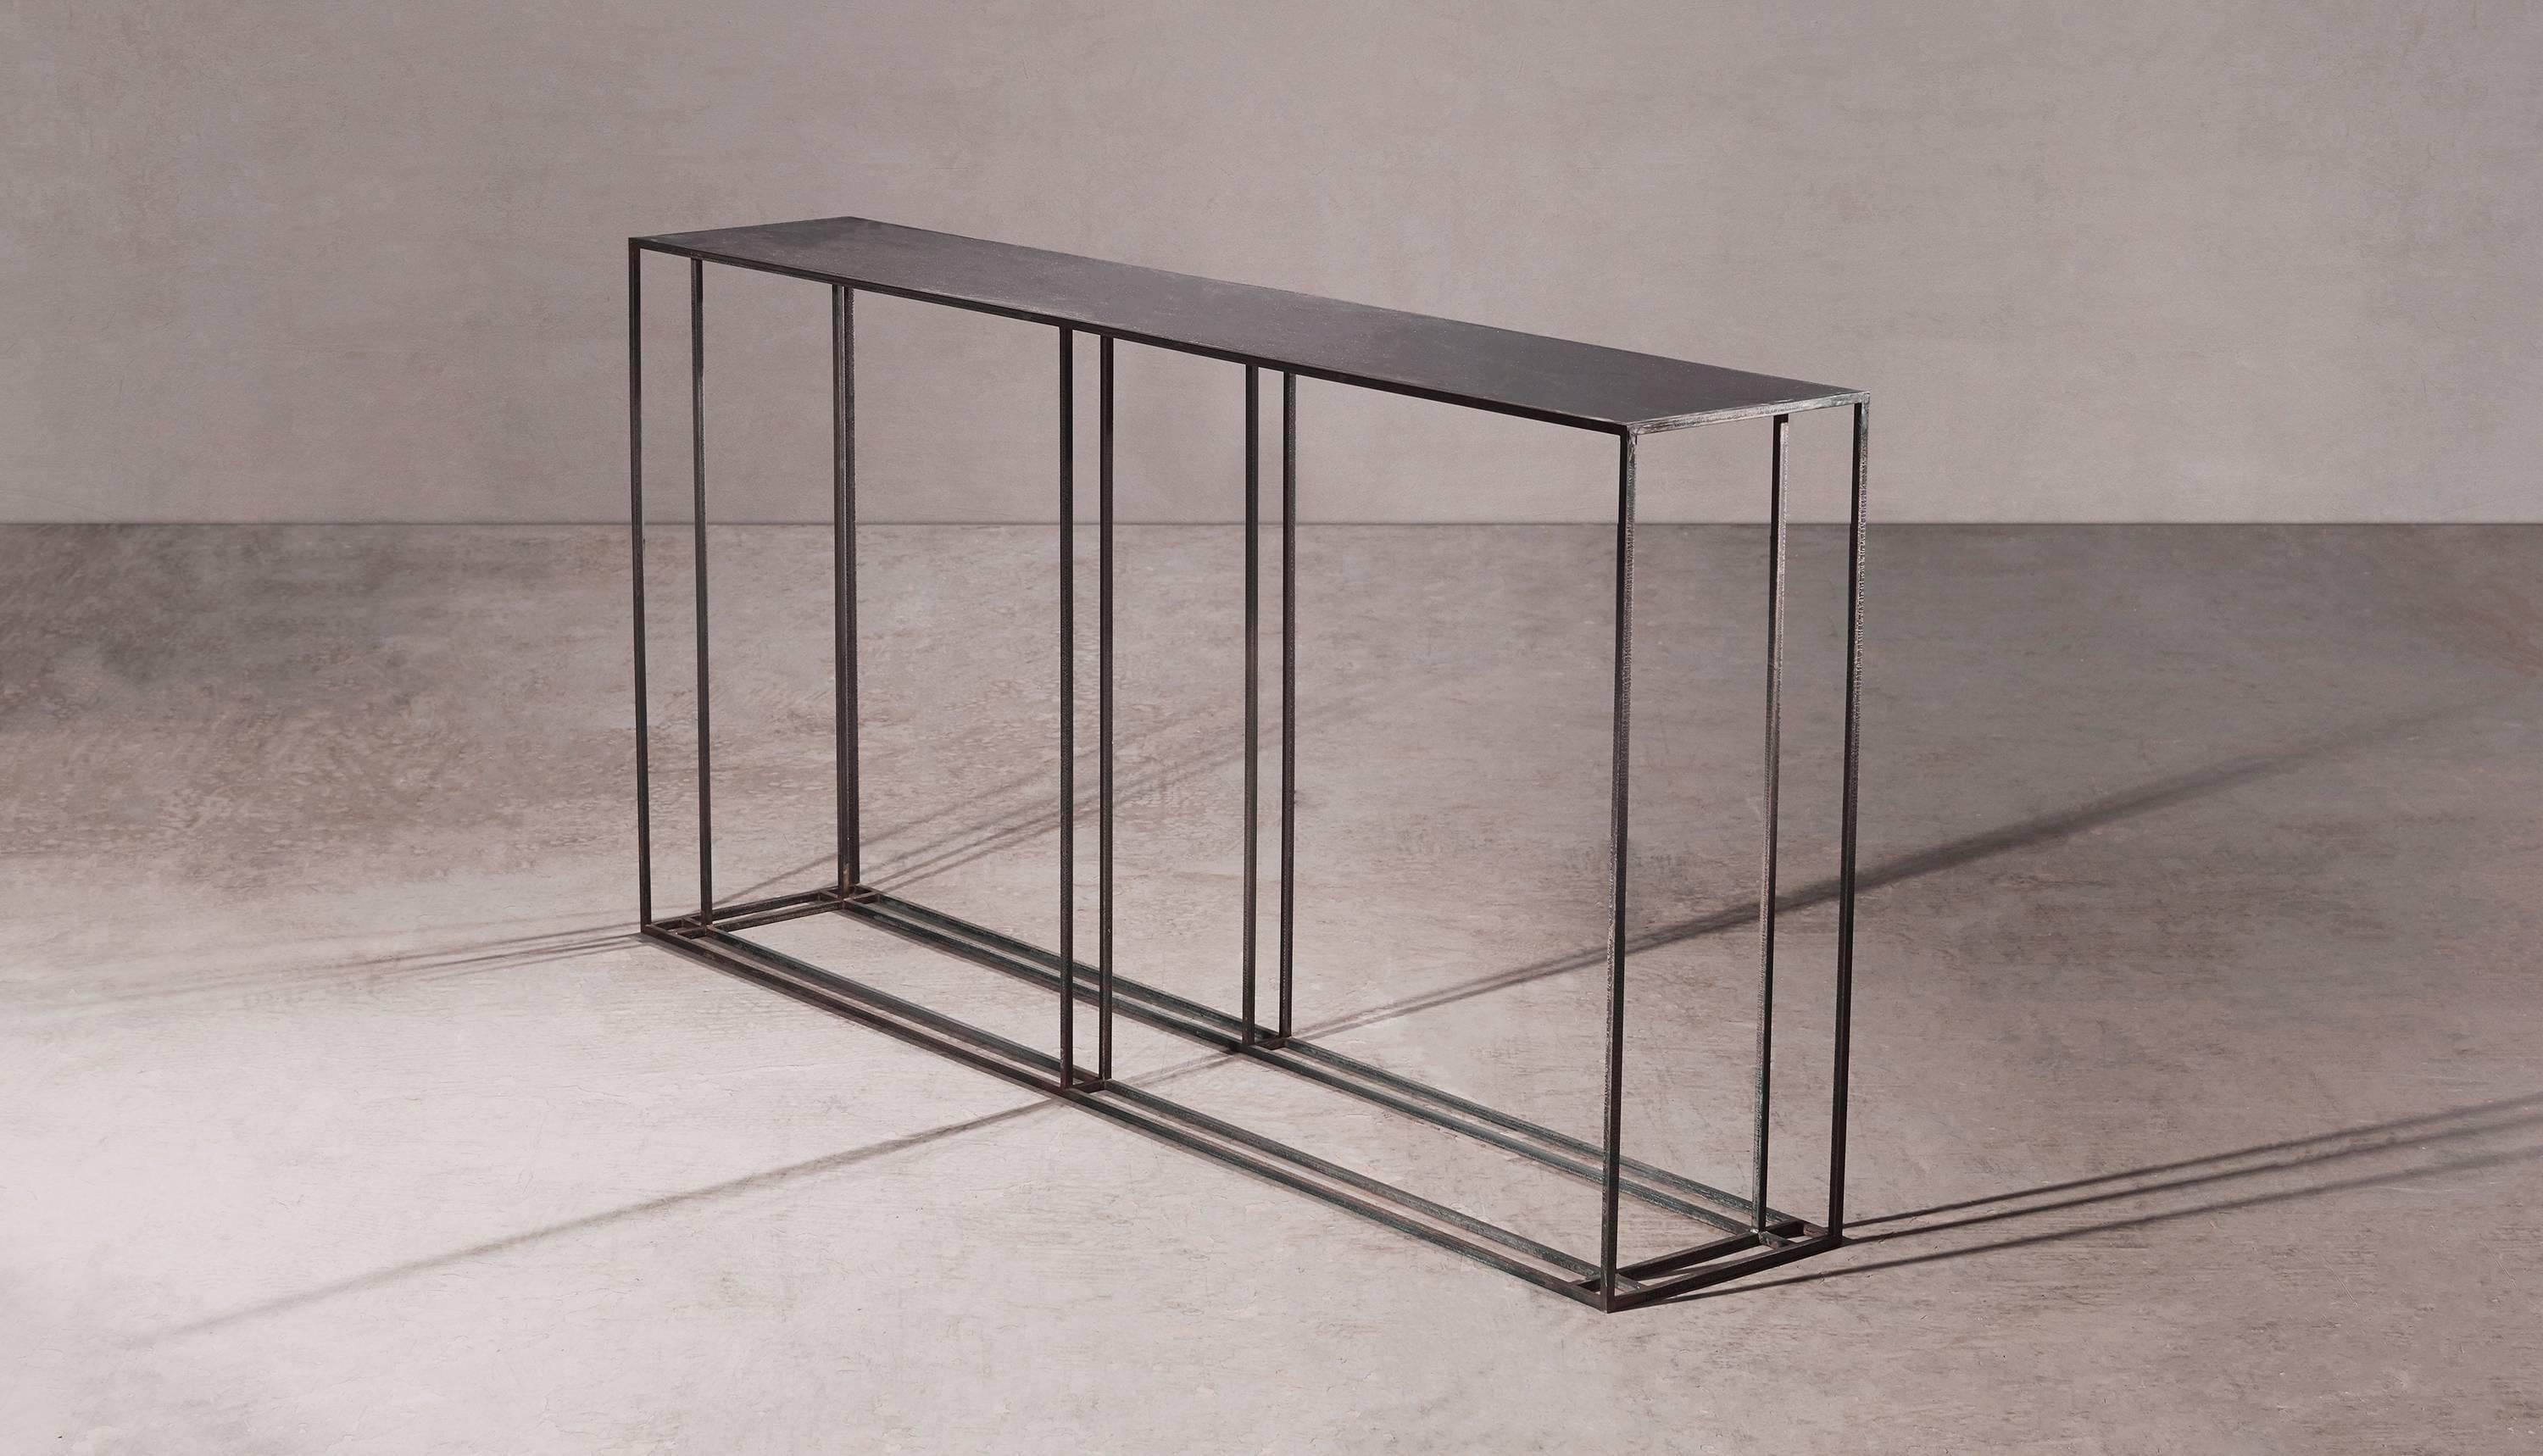 A console table in all blackened steel. Hand crafted to order in the North. Bespoke finishes and sizes are available.

Measures:  180cm width x 35cm depth x 80cm height.
Custom finishes and sizes available upon request.

Made to order in 12